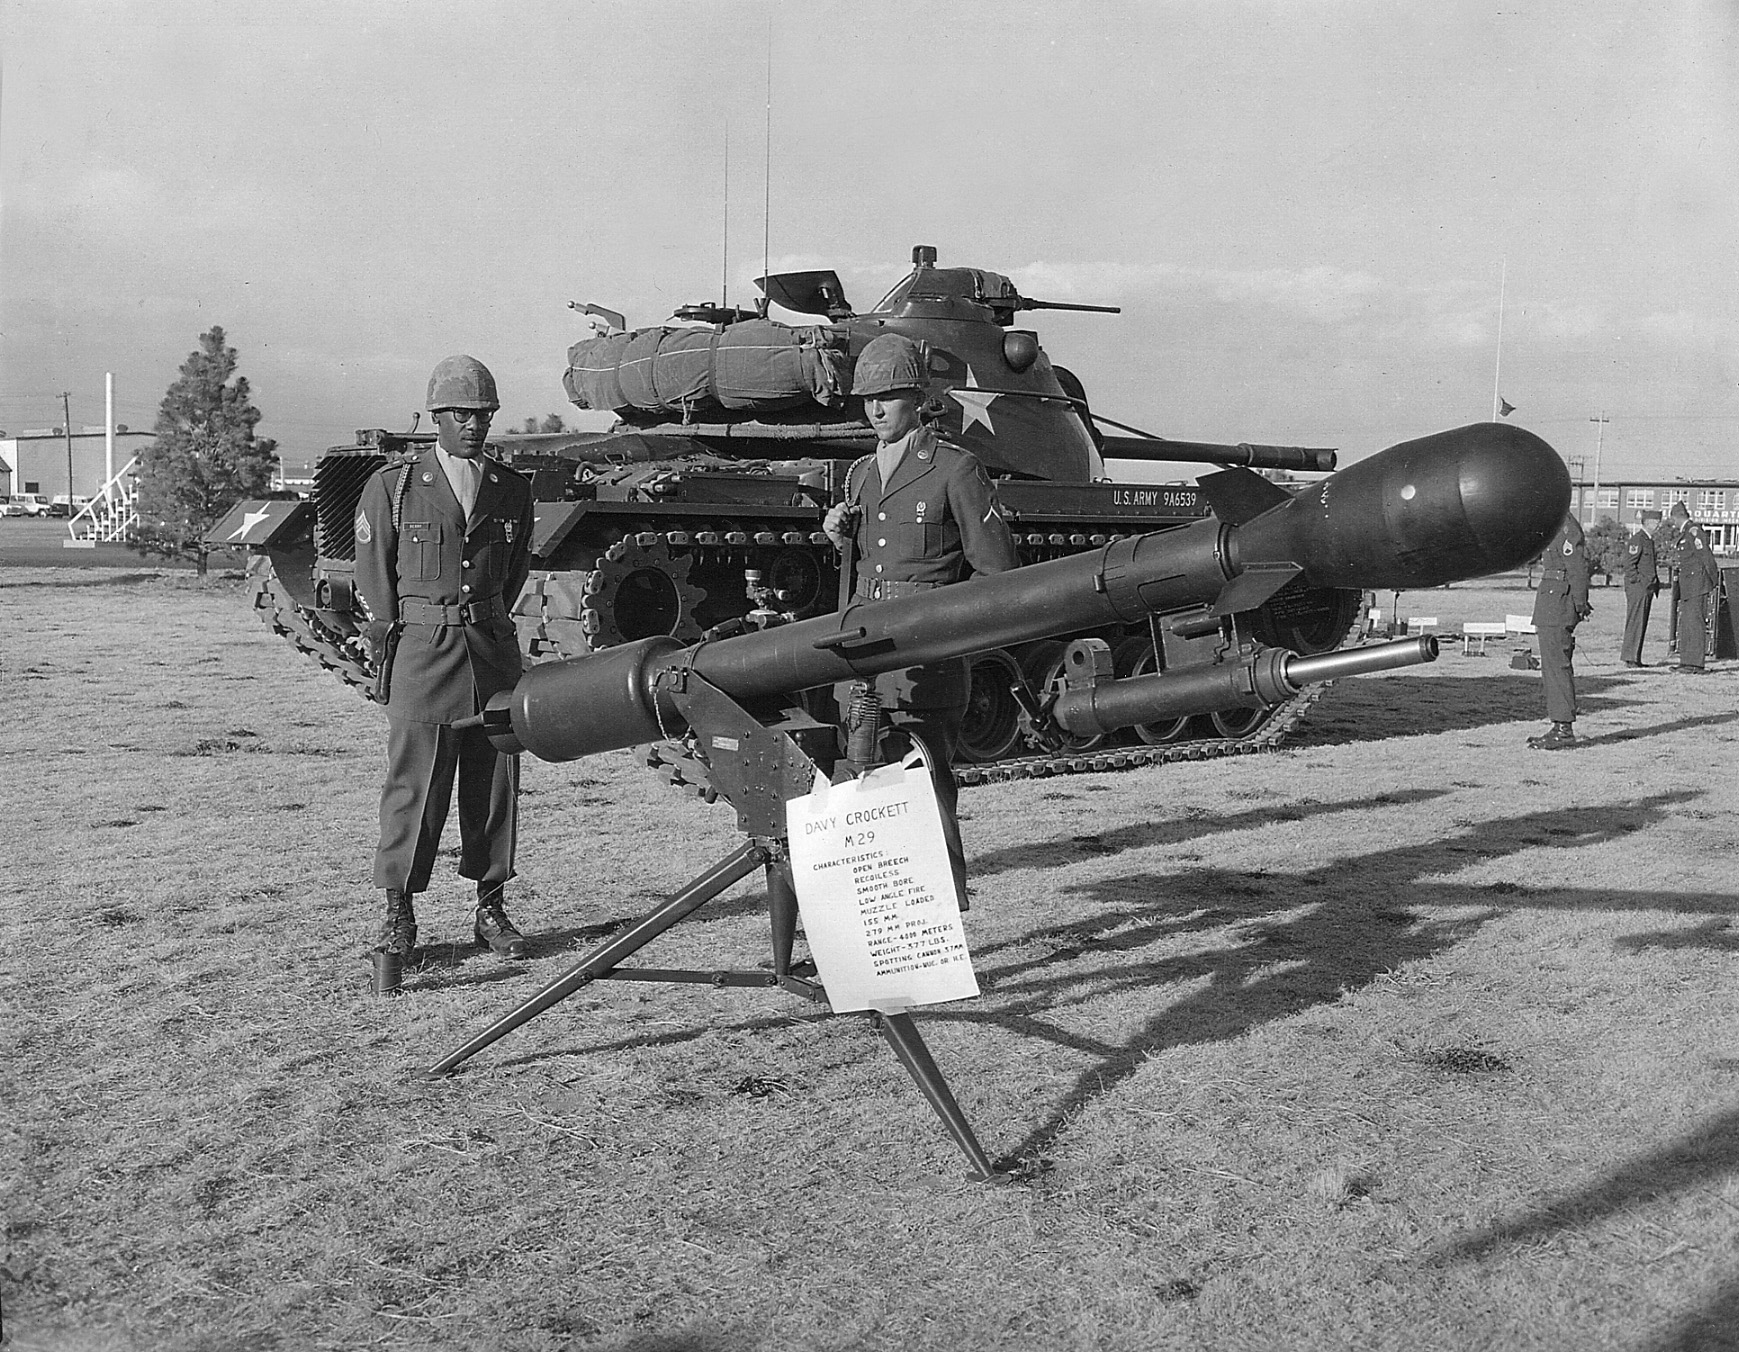 An M-29 Davy Crockett mobile missile launcher on display. The M-29 was capable of delivering either conventional or nuclear warheads.